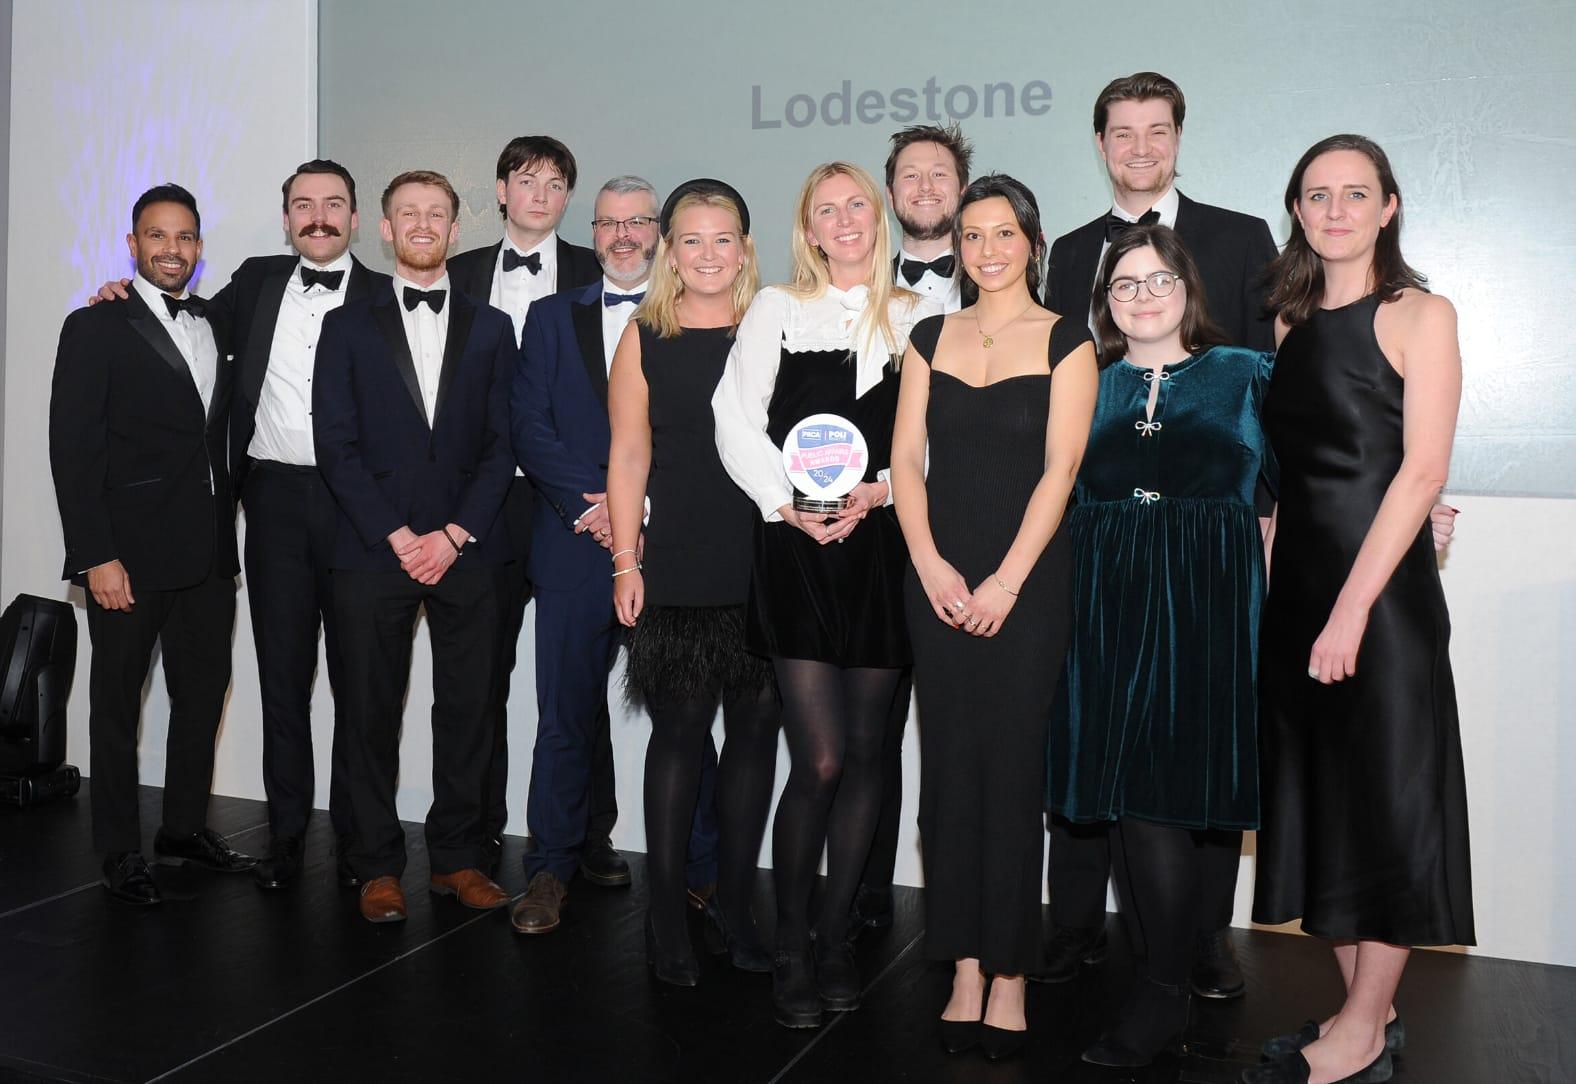 Lodestone wins Medium Consultancy of the Year at the PRCA Polimonitor Public Affairs Awards